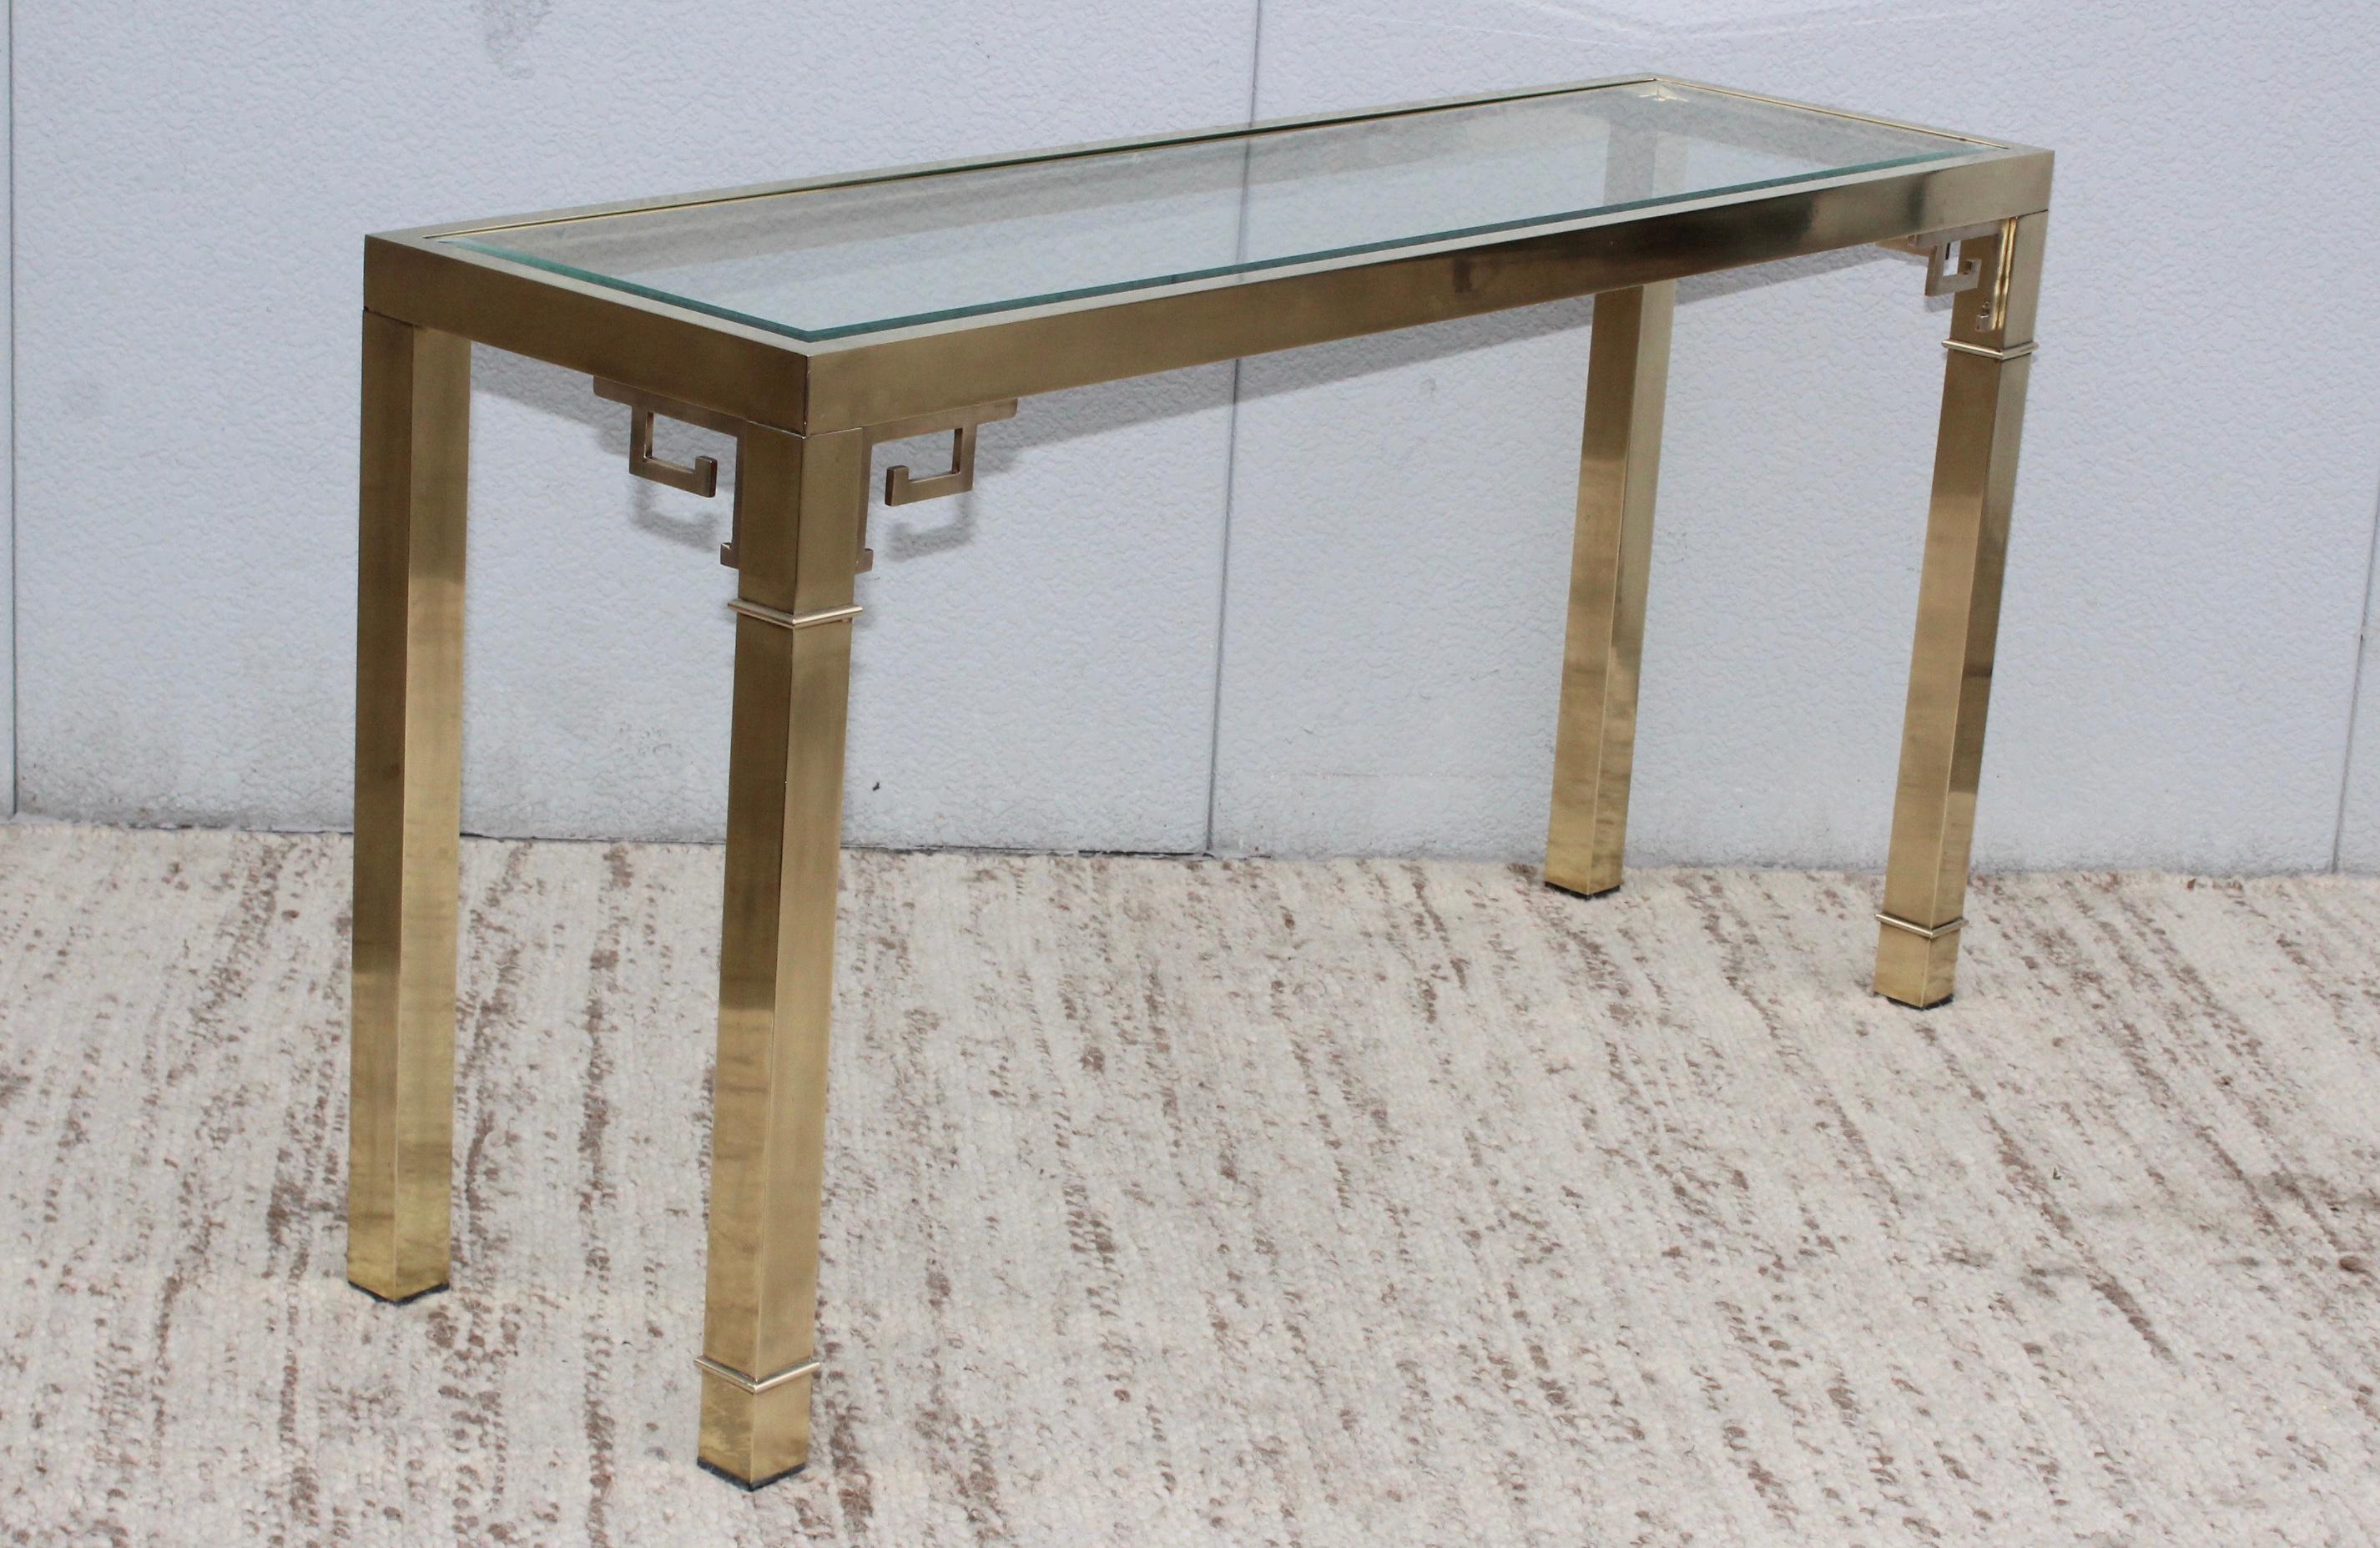 1970s modern Greek key brass console by Mastercraft, the console have been gently hand polished, there is minor wear and patina to the brass. it retain the original 